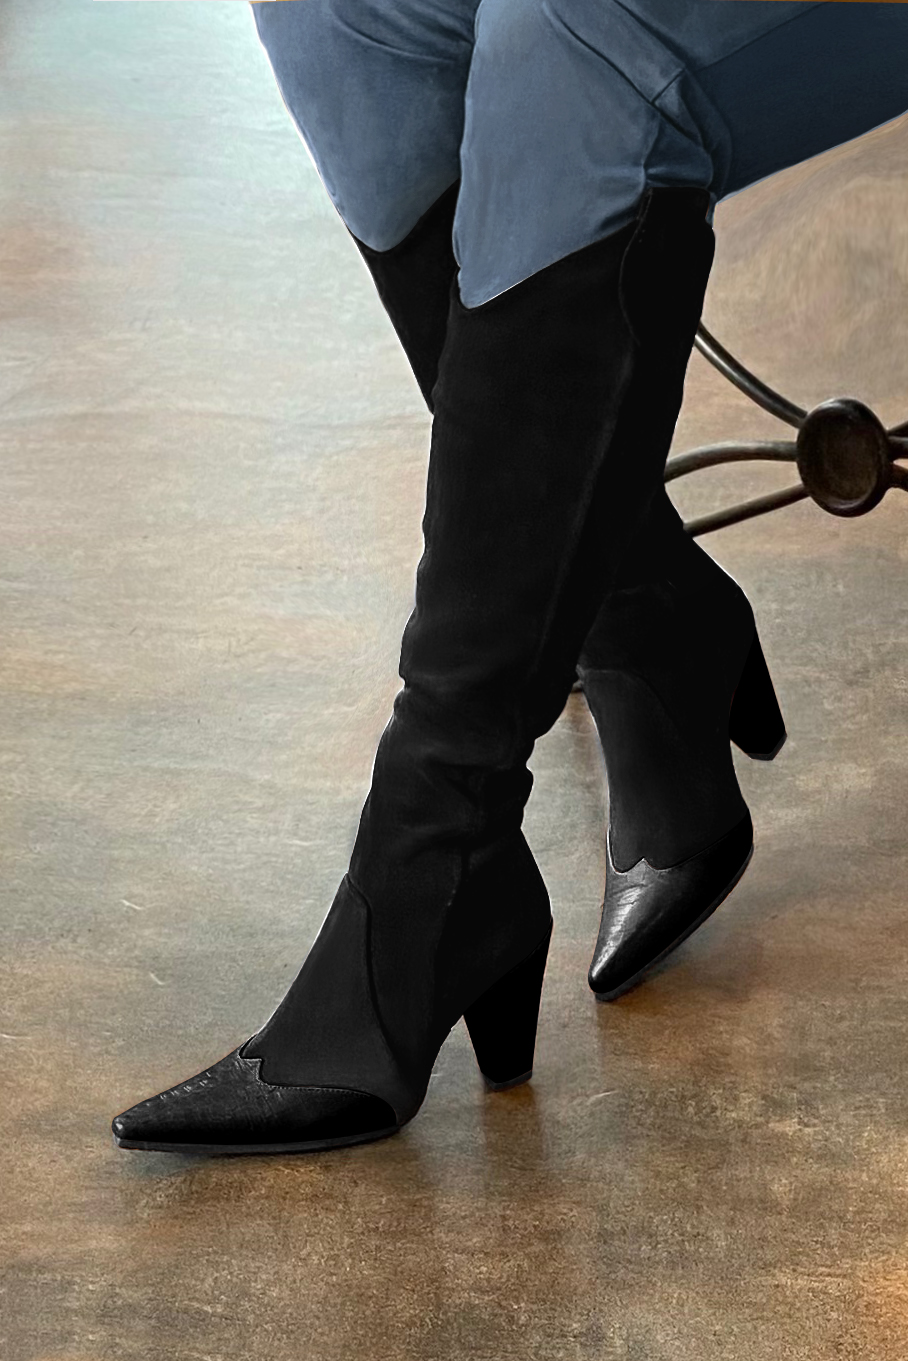 Satin black women's cowboy boots. Pointed toe. Very high cone heels. Made to measure. Worn view - Florence KOOIJMAN